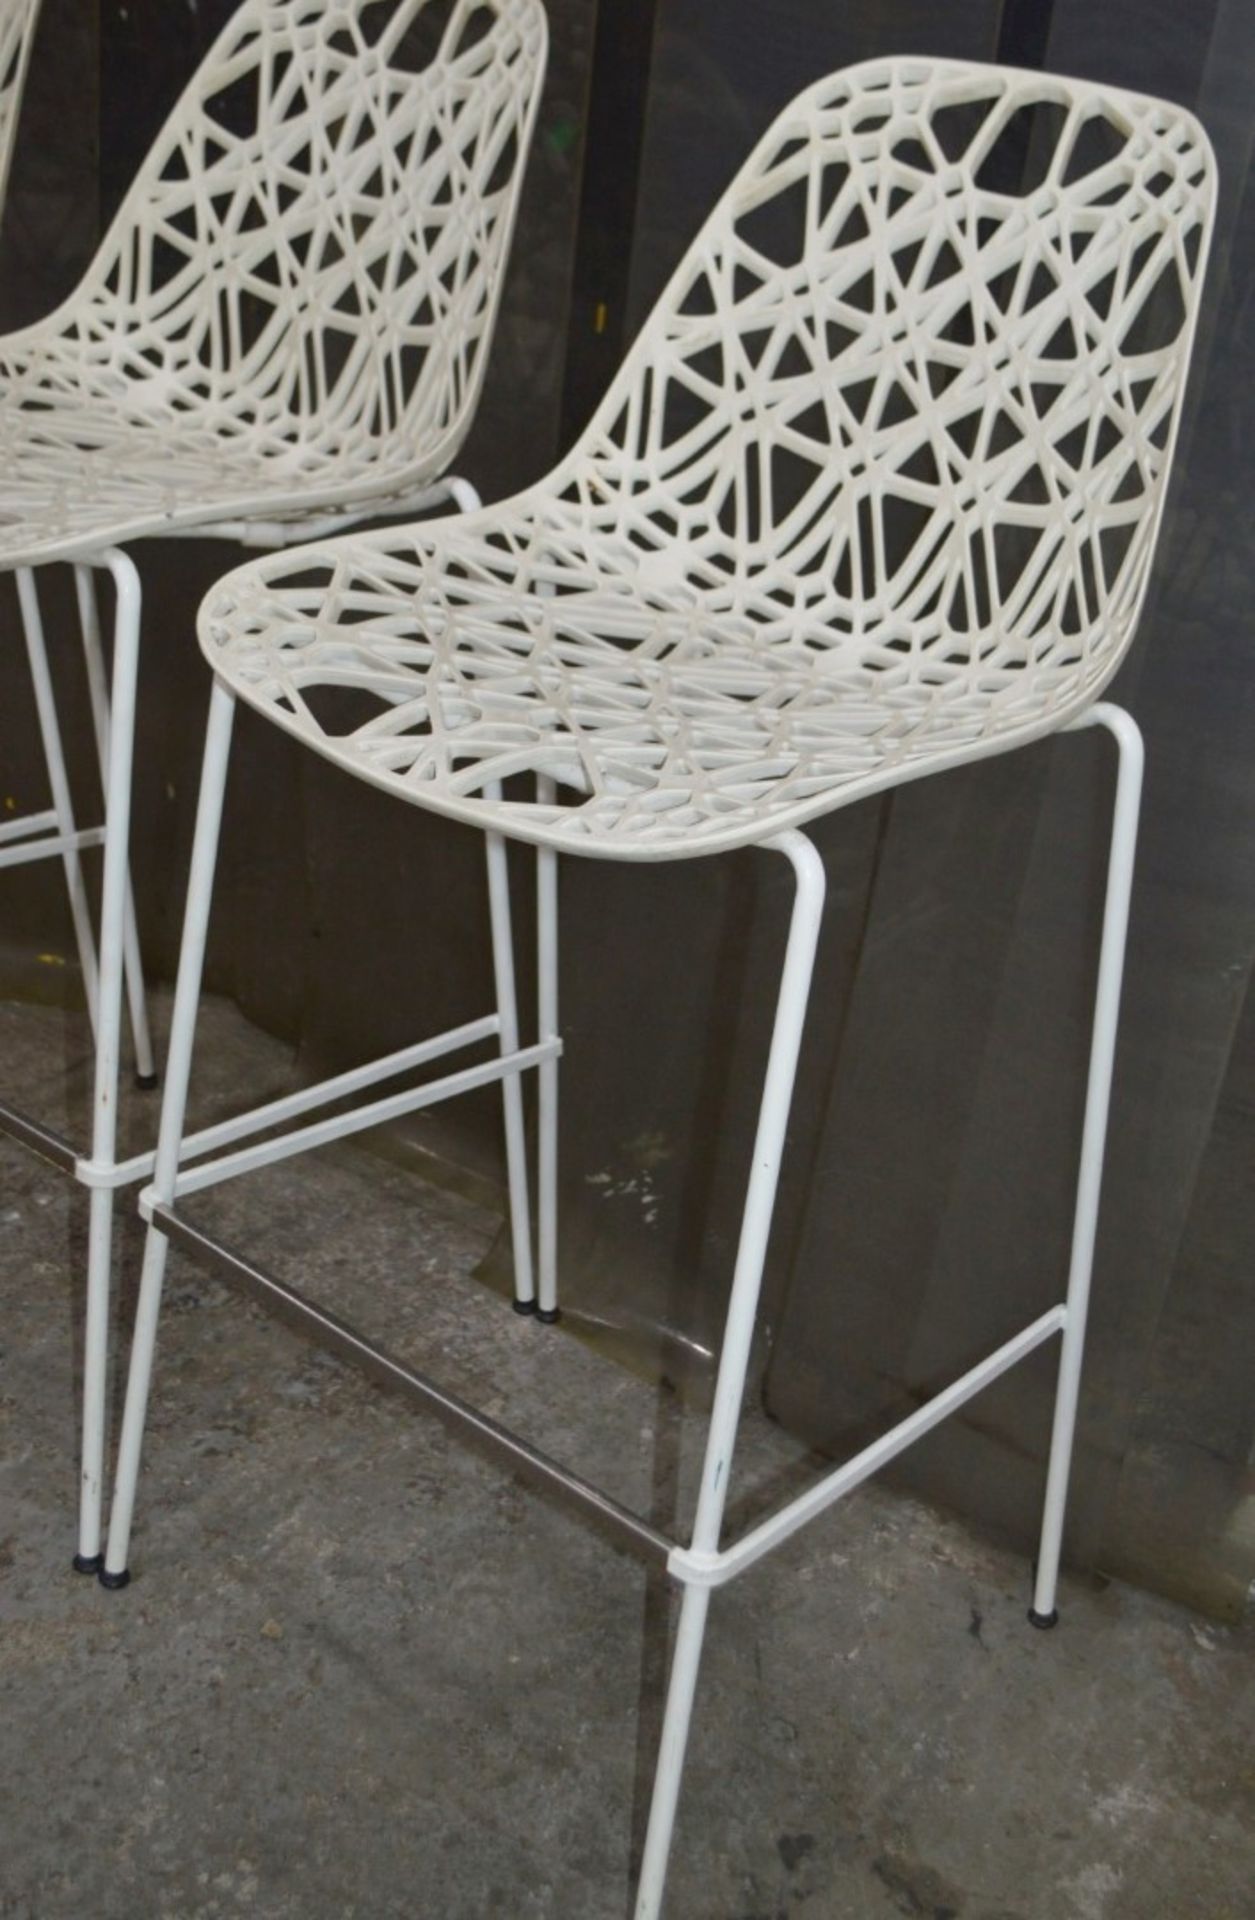 4 x Commercial Outdoor Bar Stools In White - Dimensions: H108 x W52 x D50cm, Seat Height 73cm - Image 3 of 5